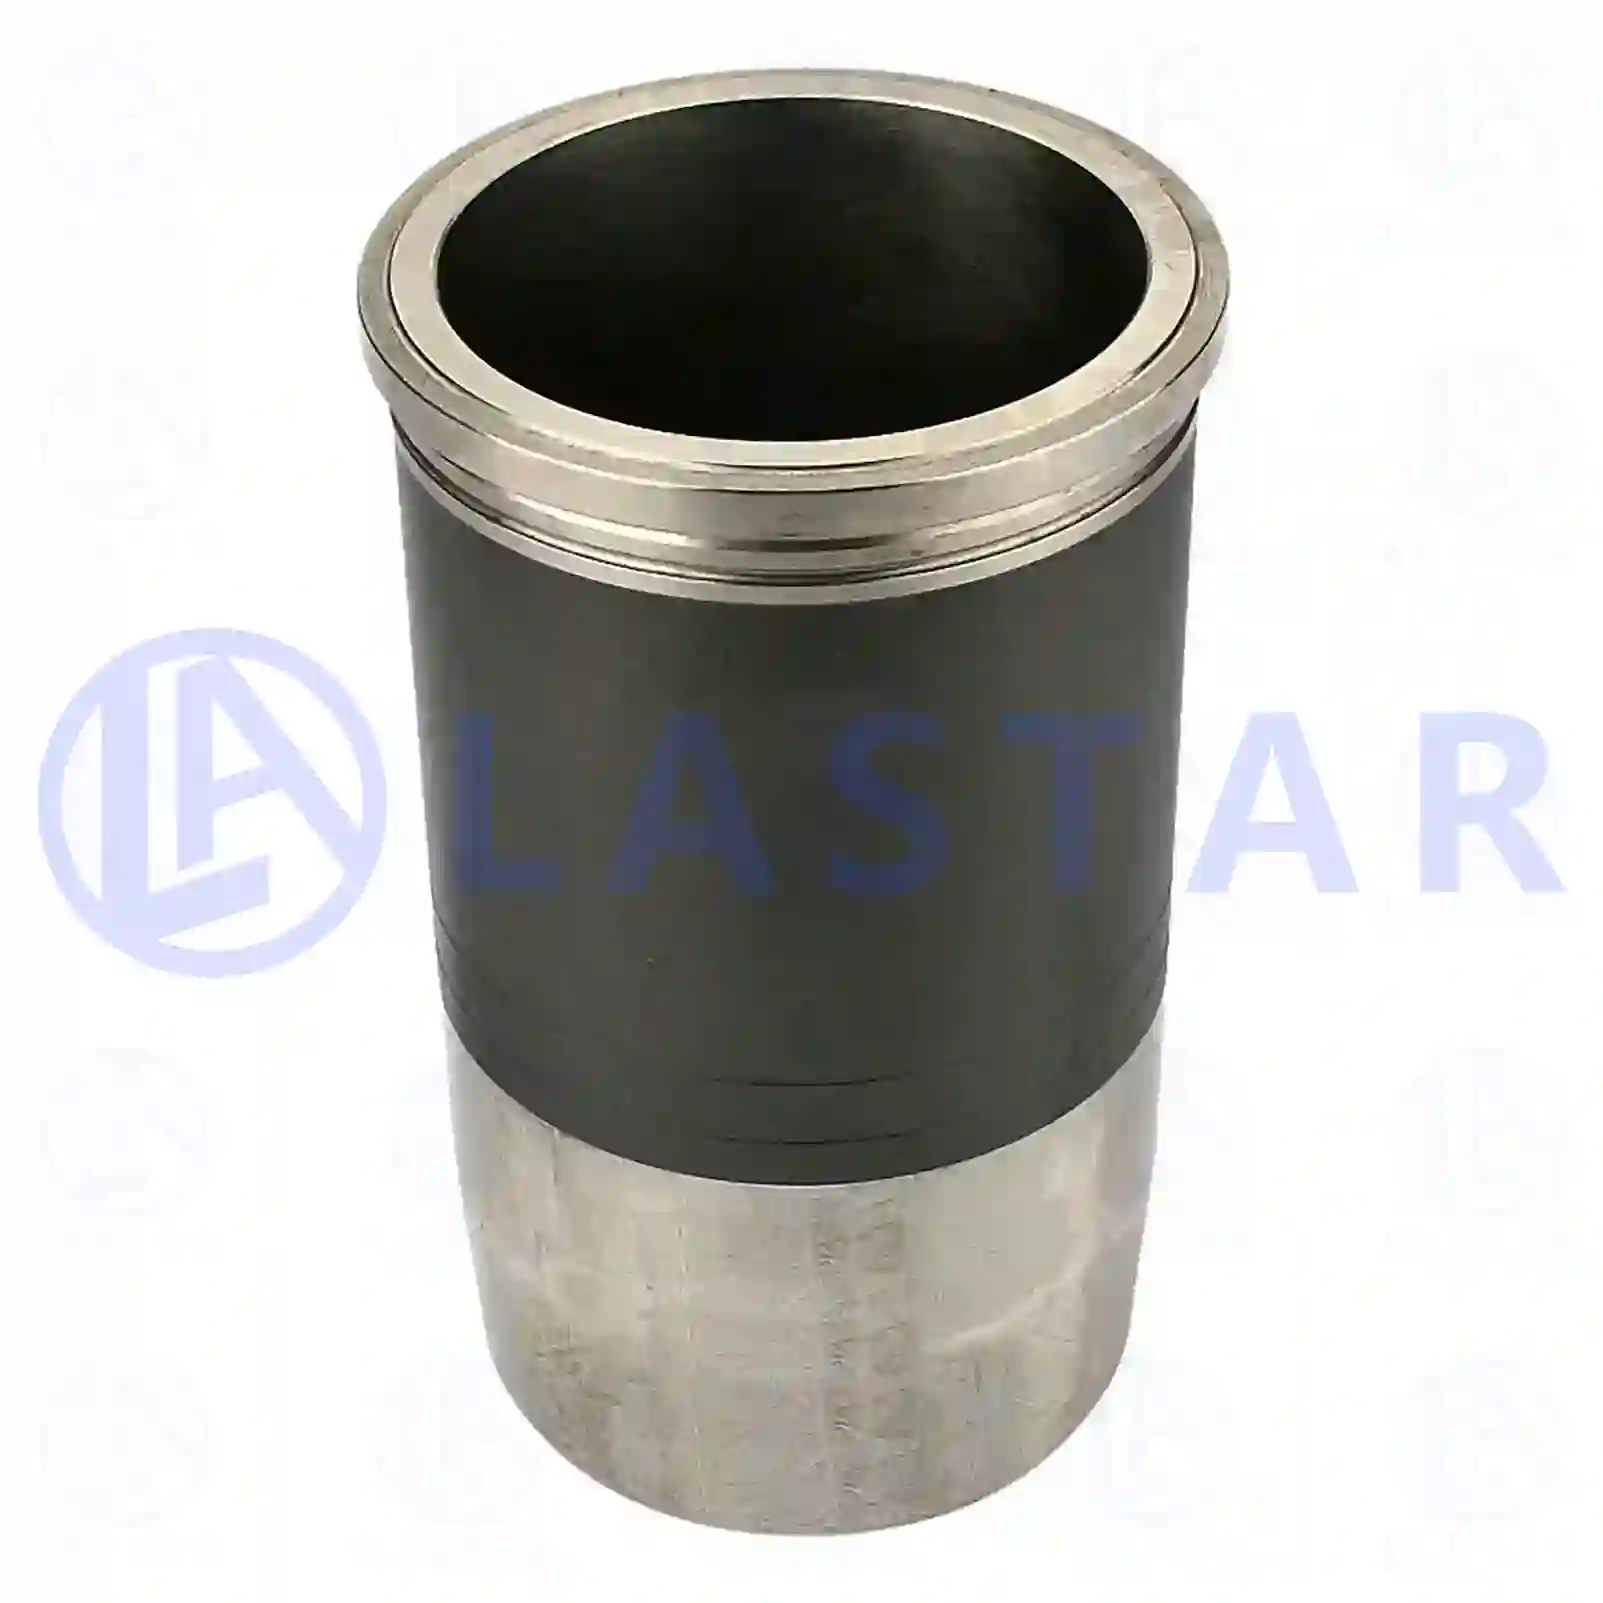 Cylinder liner, without seal rings, 77701979, 4030113410 ||  77701979 Lastar Spare Part | Truck Spare Parts, Auotomotive Spare Parts Cylinder liner, without seal rings, 77701979, 4030113410 ||  77701979 Lastar Spare Part | Truck Spare Parts, Auotomotive Spare Parts